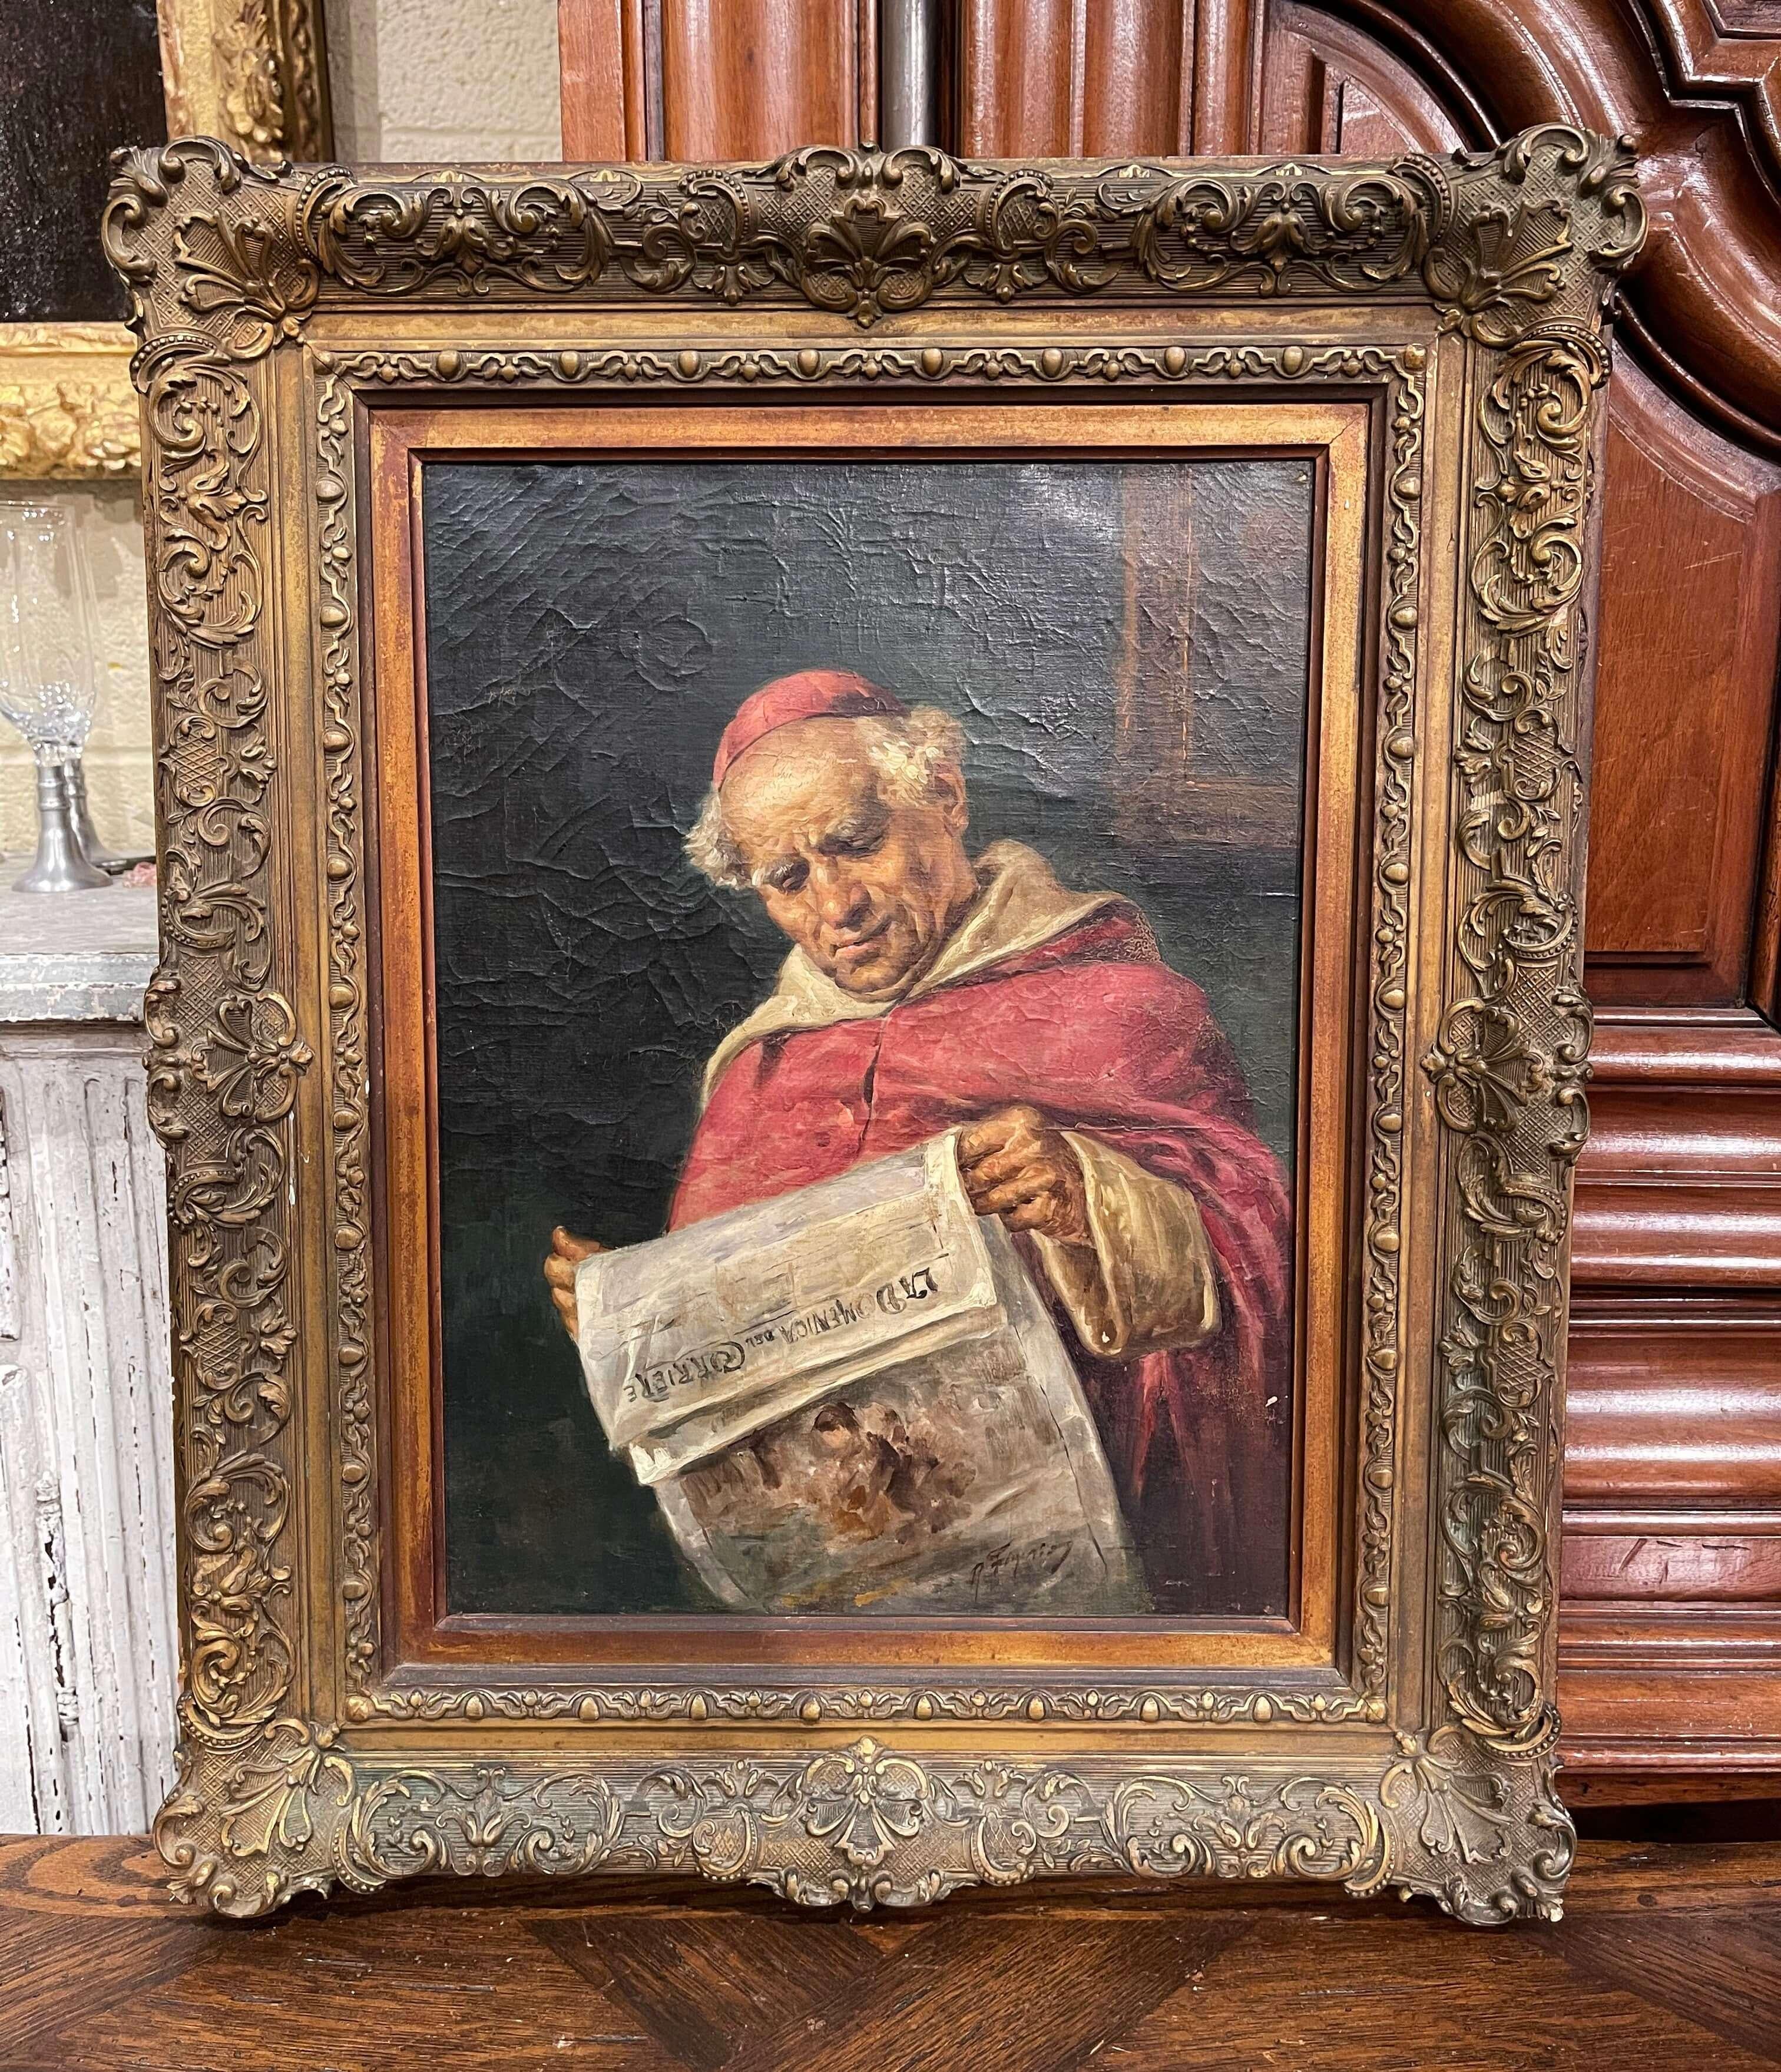 Hand-Painted 19th Century Framed Cardinal Reading Oil on Canvas Painting Signed R. Figerio